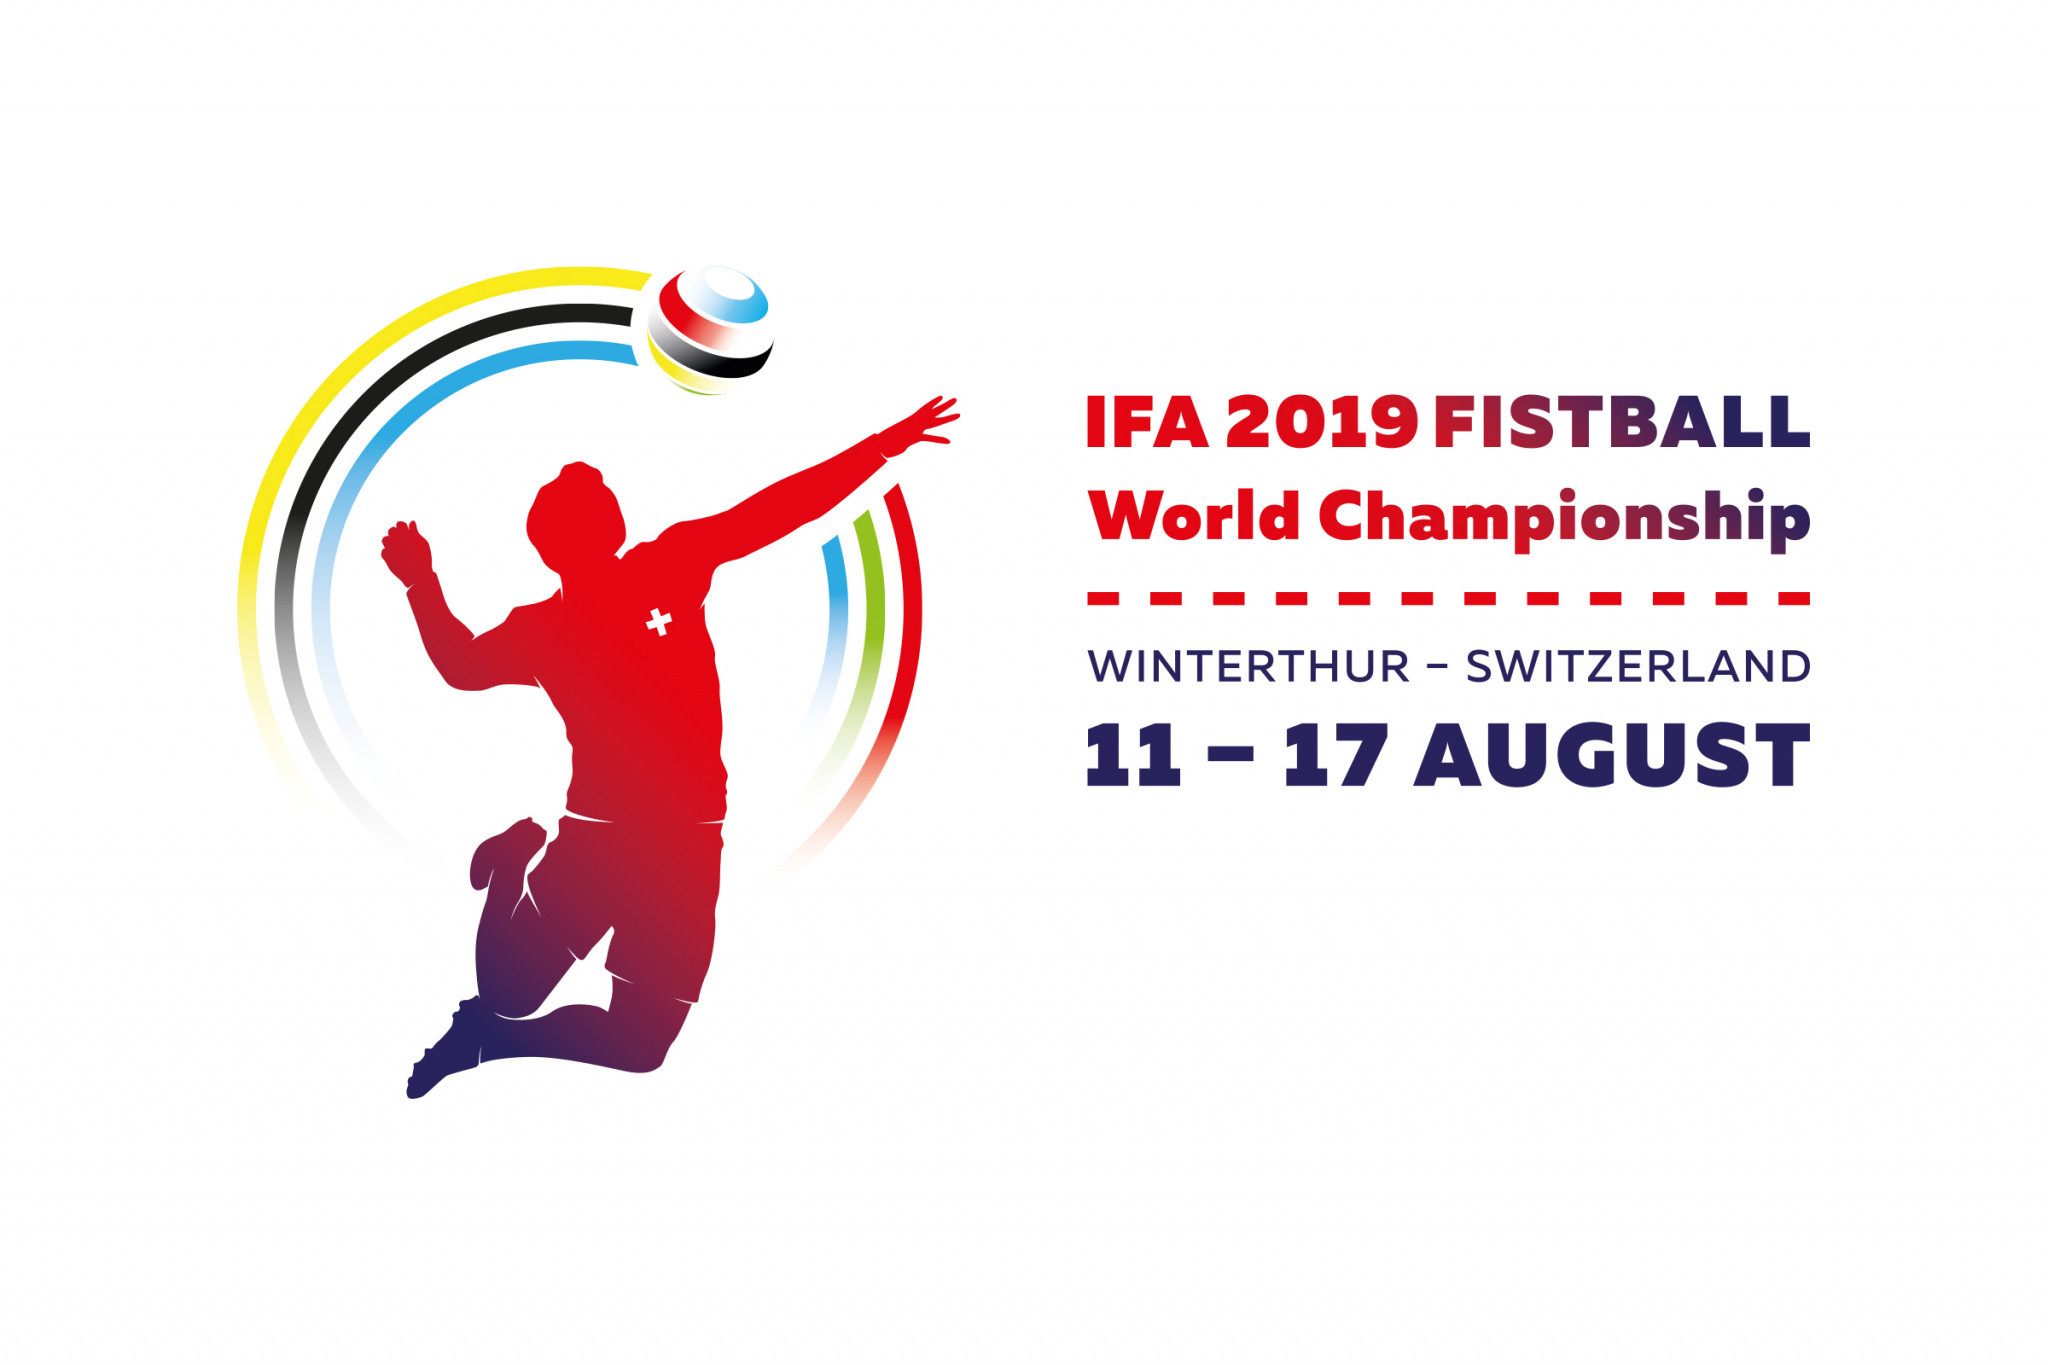 More than 11,000 tickets have been sold for the IFA World Fistball Championship in Winterthur ©IFA